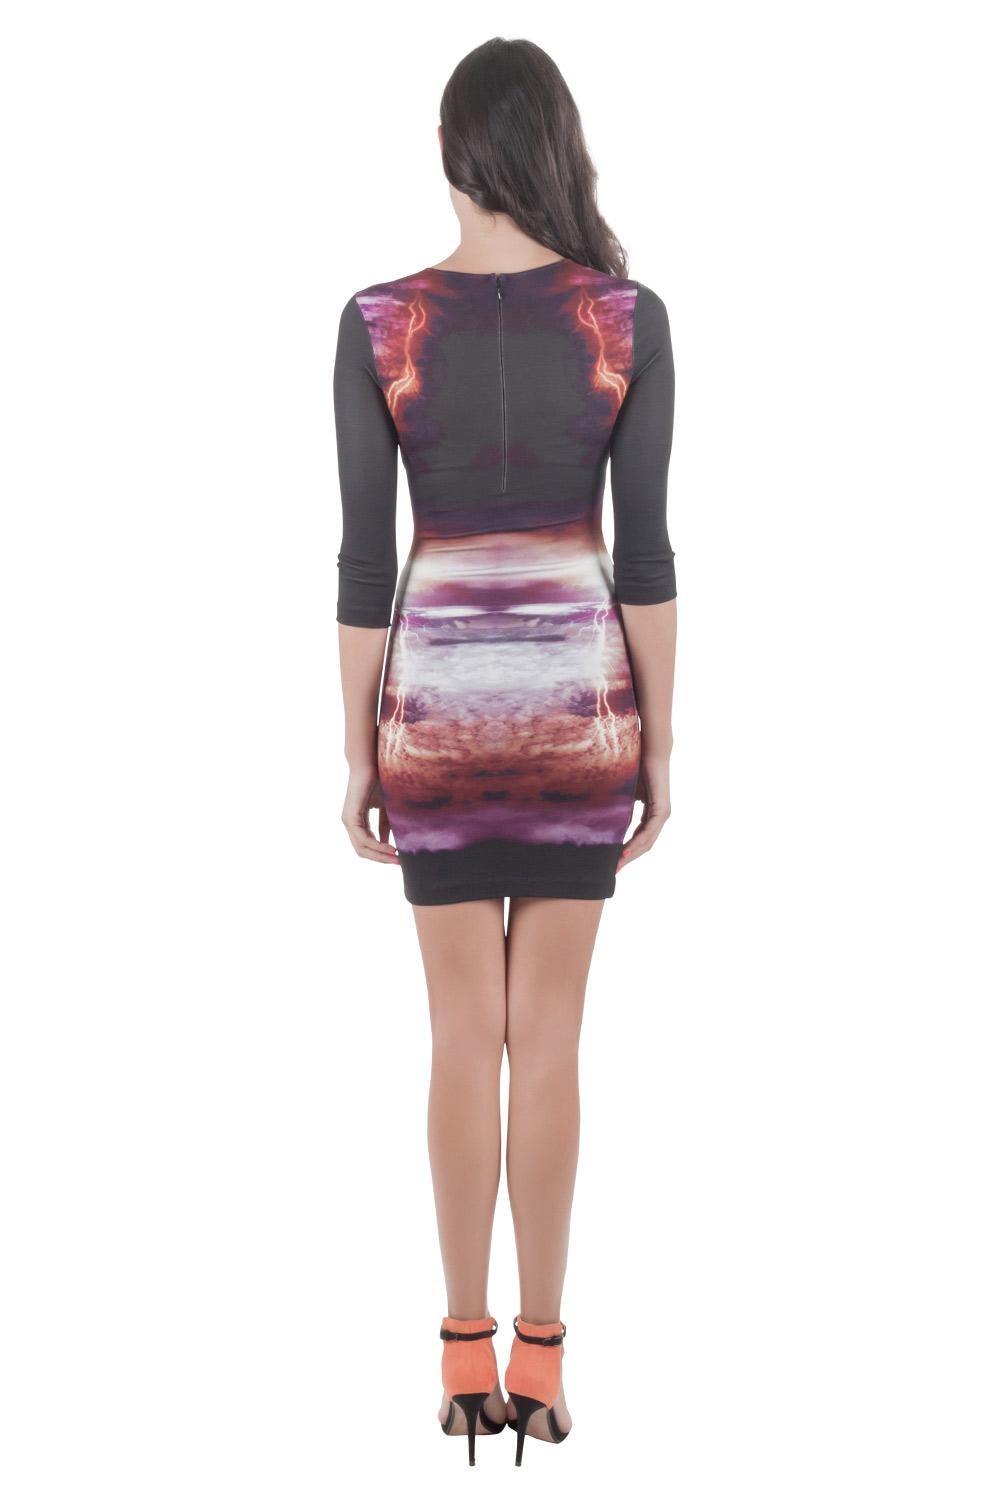 Opt for this Alexander McQueen dress if you are looking for something fun and feminine. This printed dress has everything that makes it an elegant and voguish piece. This bodycon dress is complete with a round neckline and quarter